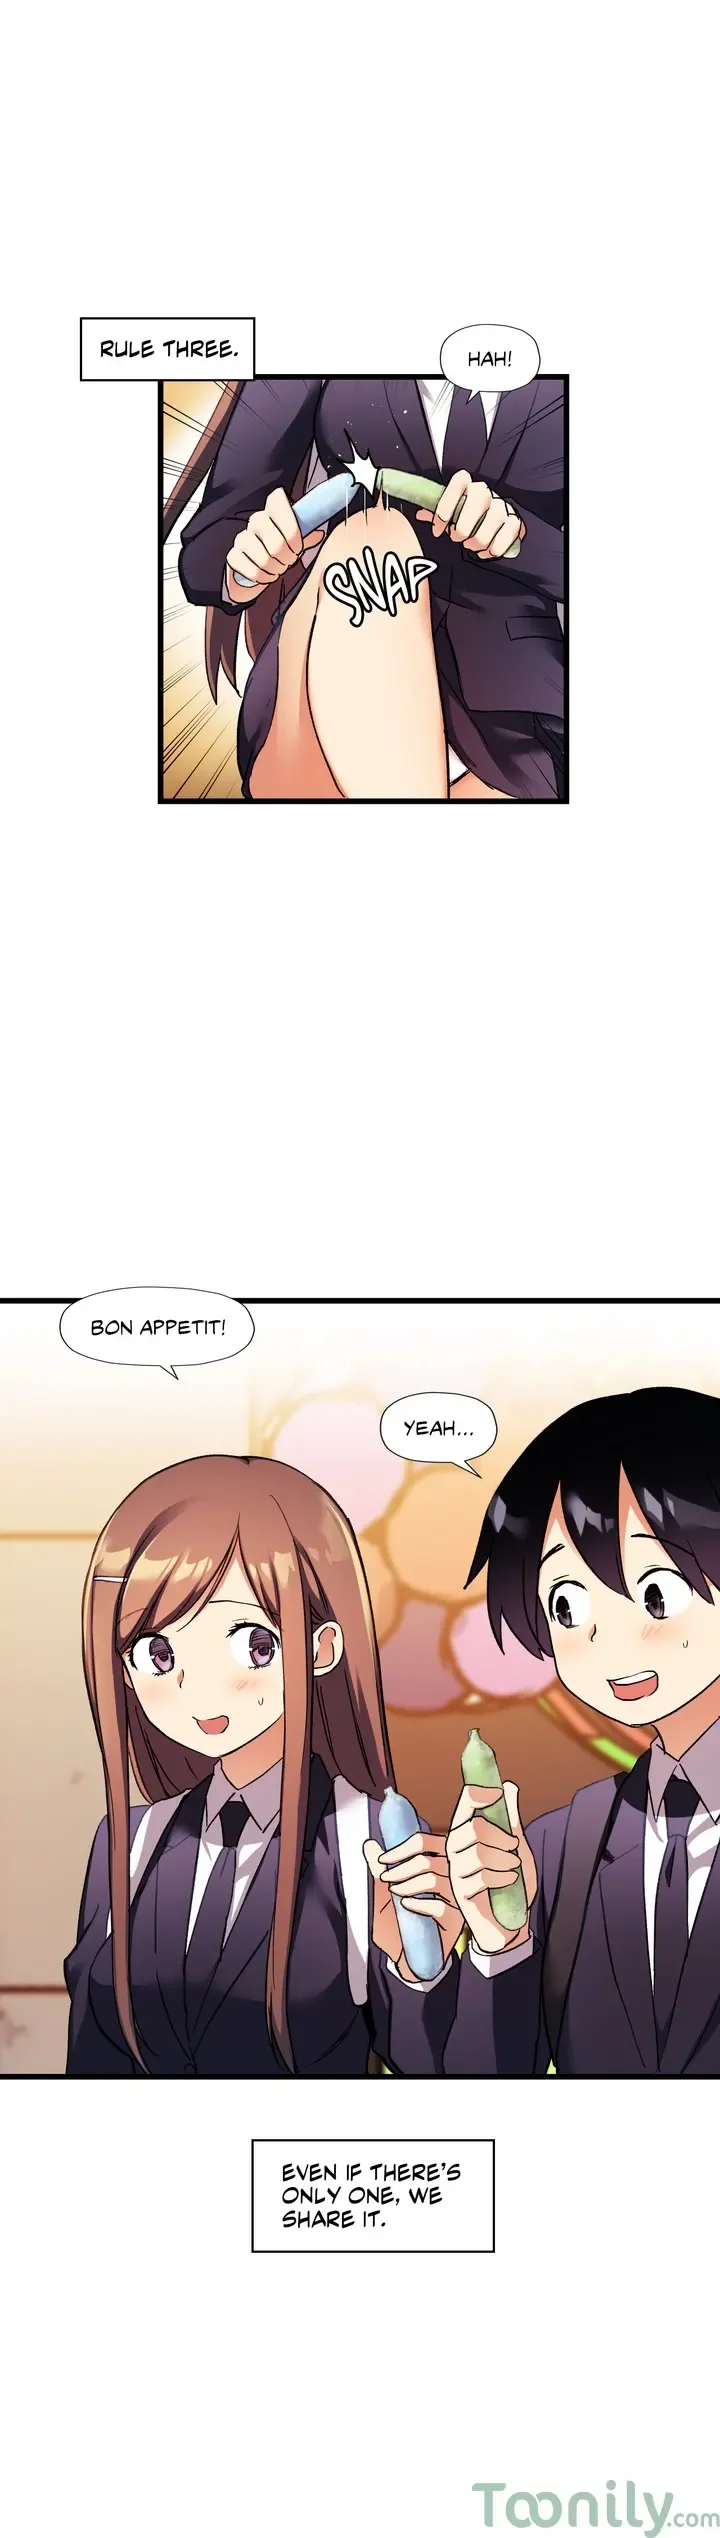 under-observation-my-first-loves-and-i-chap-31-4